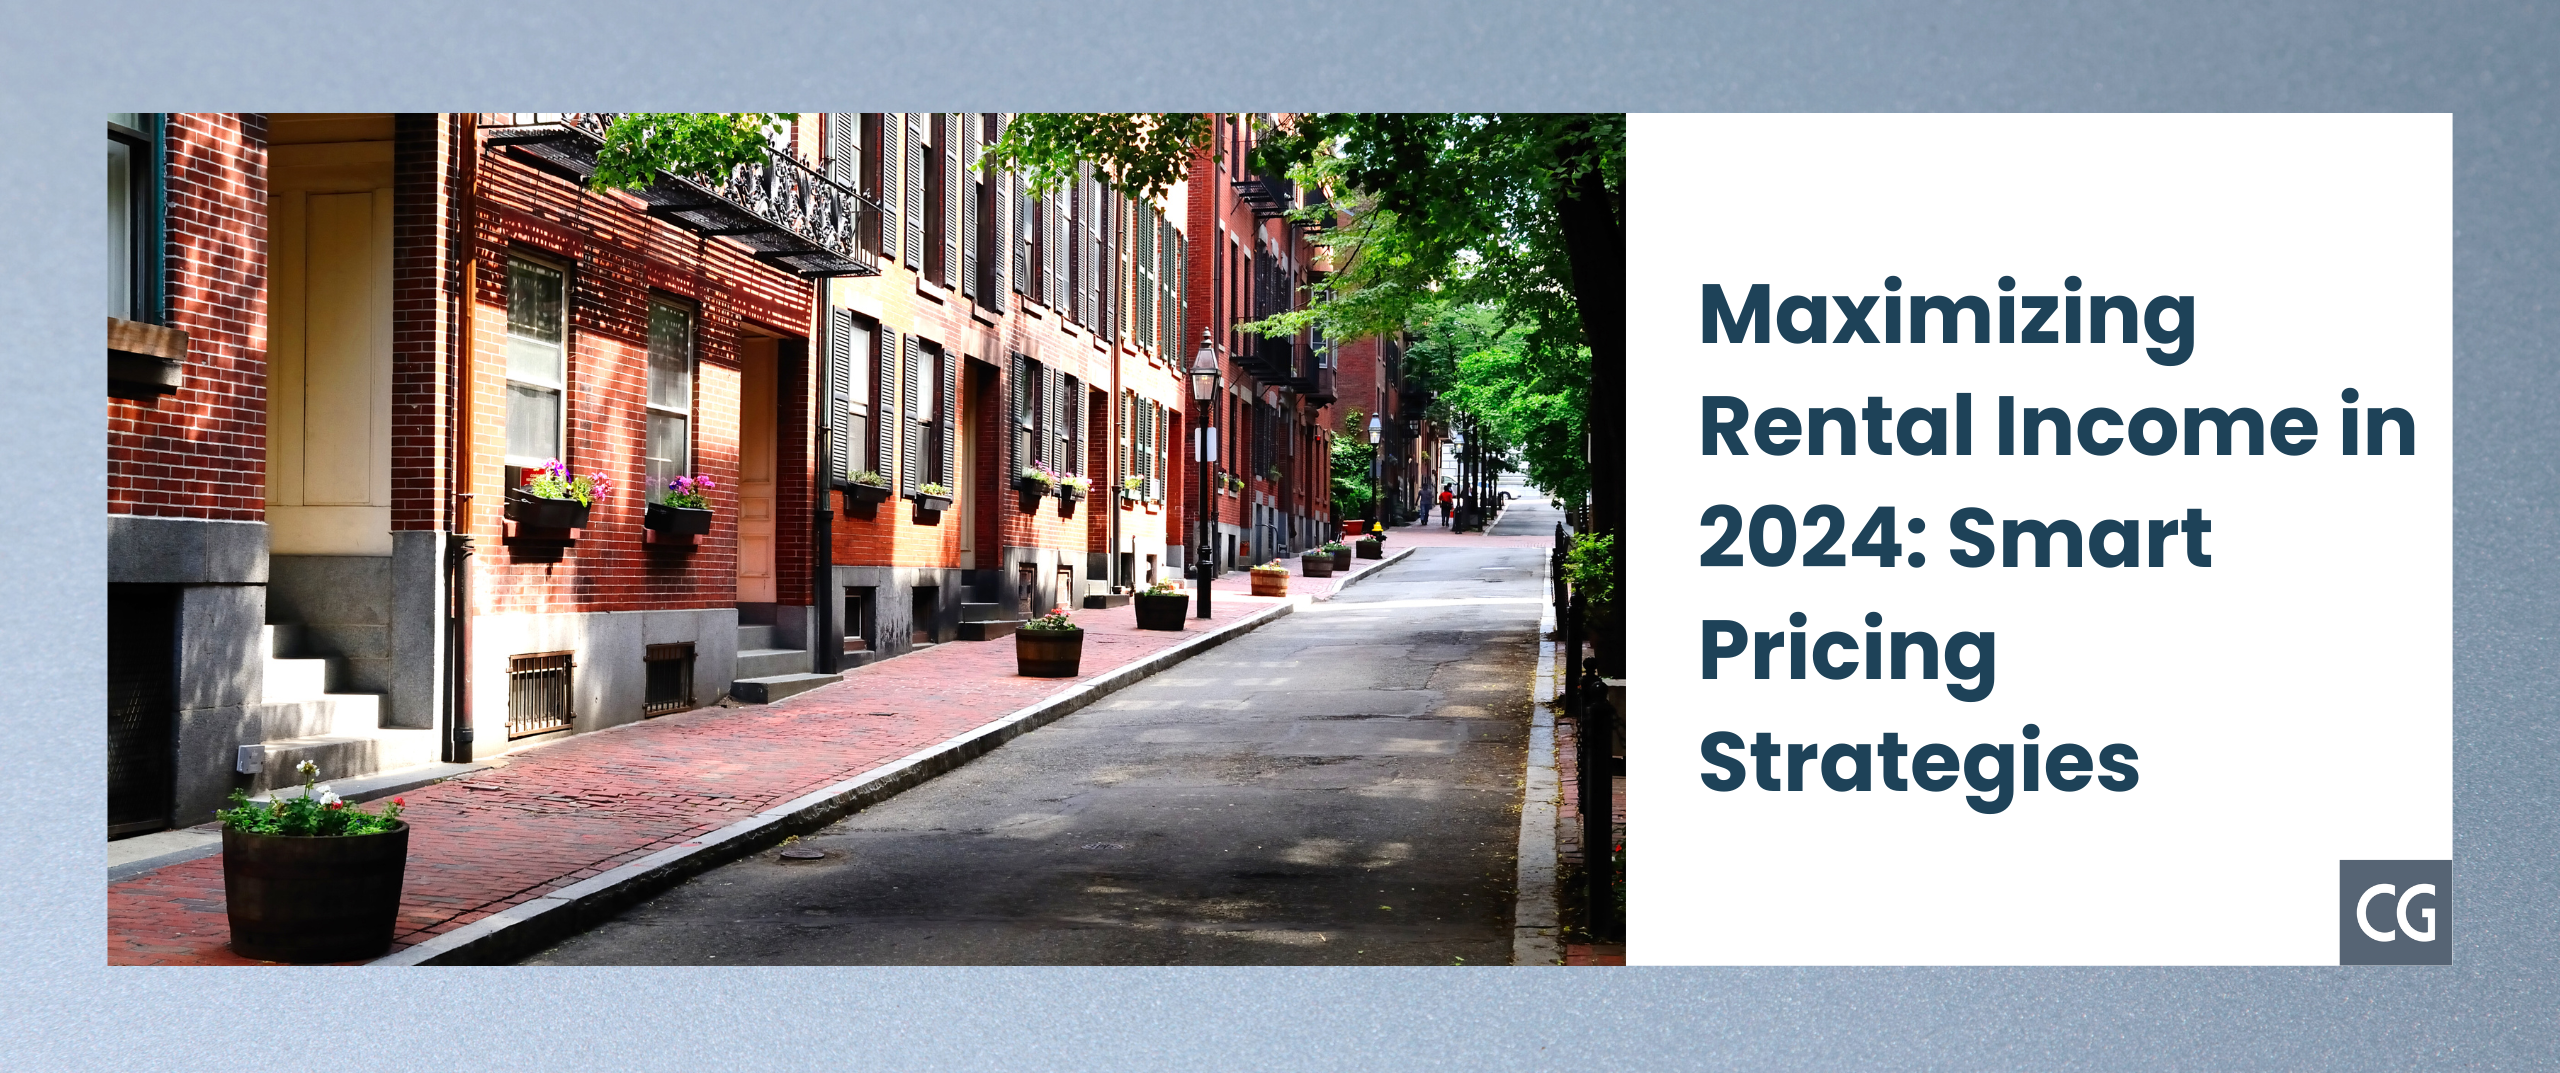 Maximizing Rental Income in 2024: Smart Pricing Tactics for Property Owners